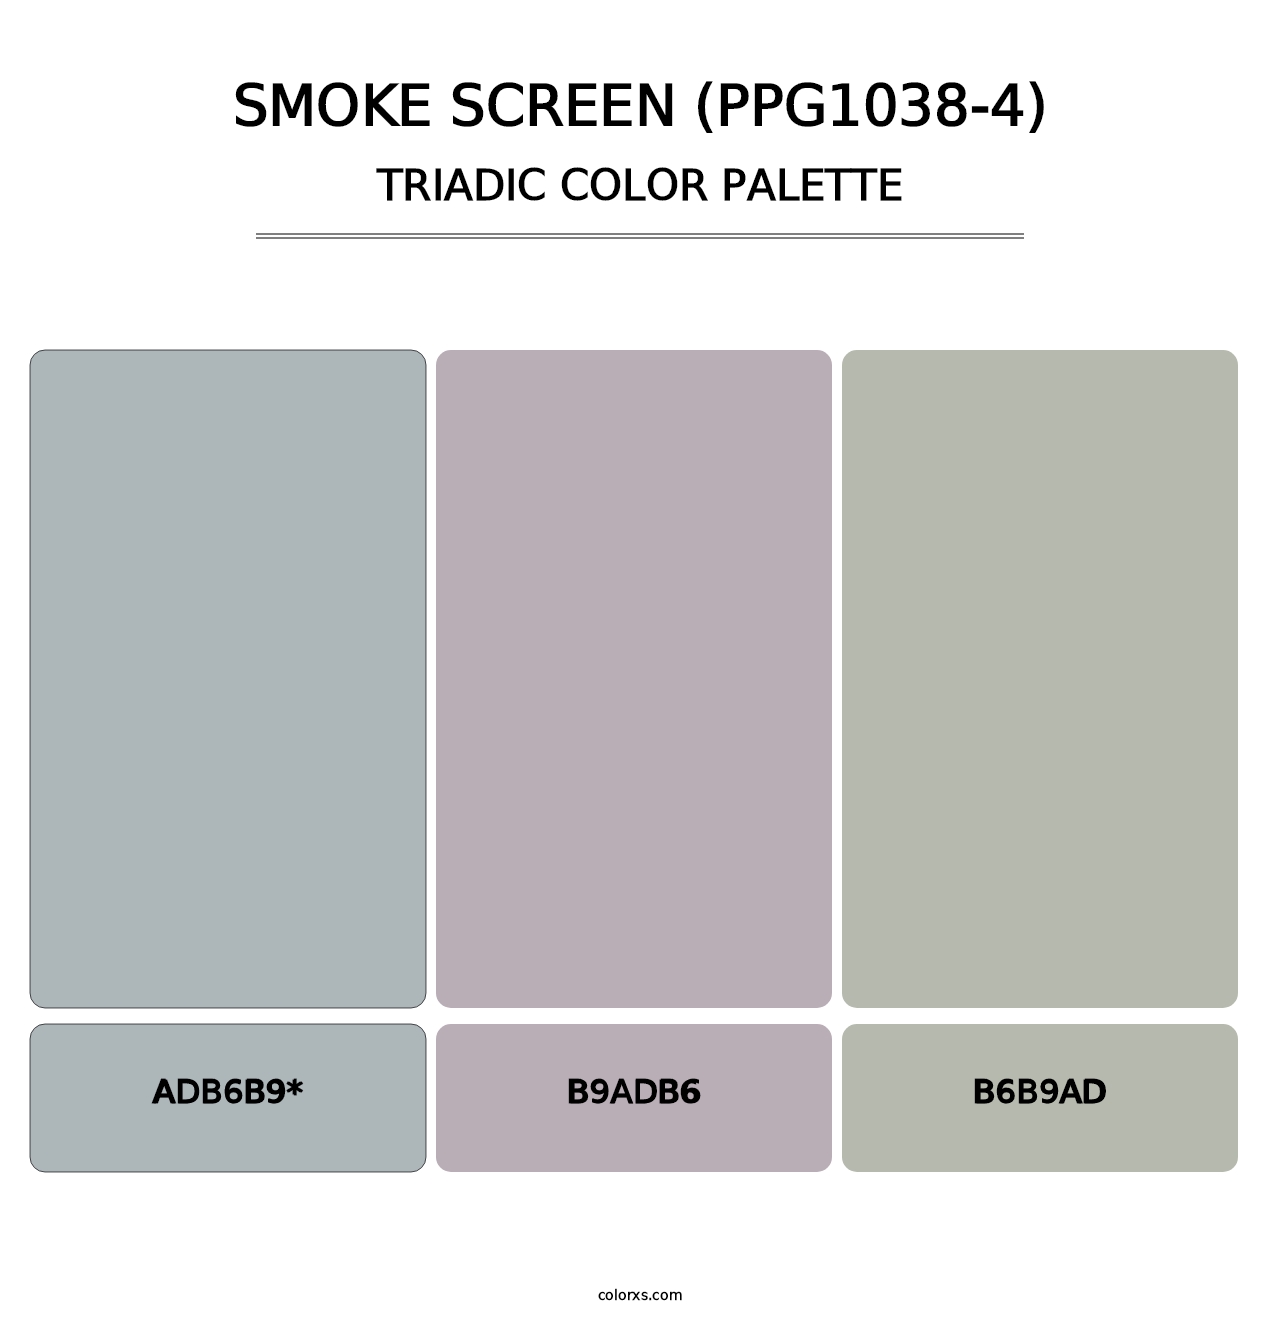 Smoke Screen (PPG1038-4) - Triadic Color Palette